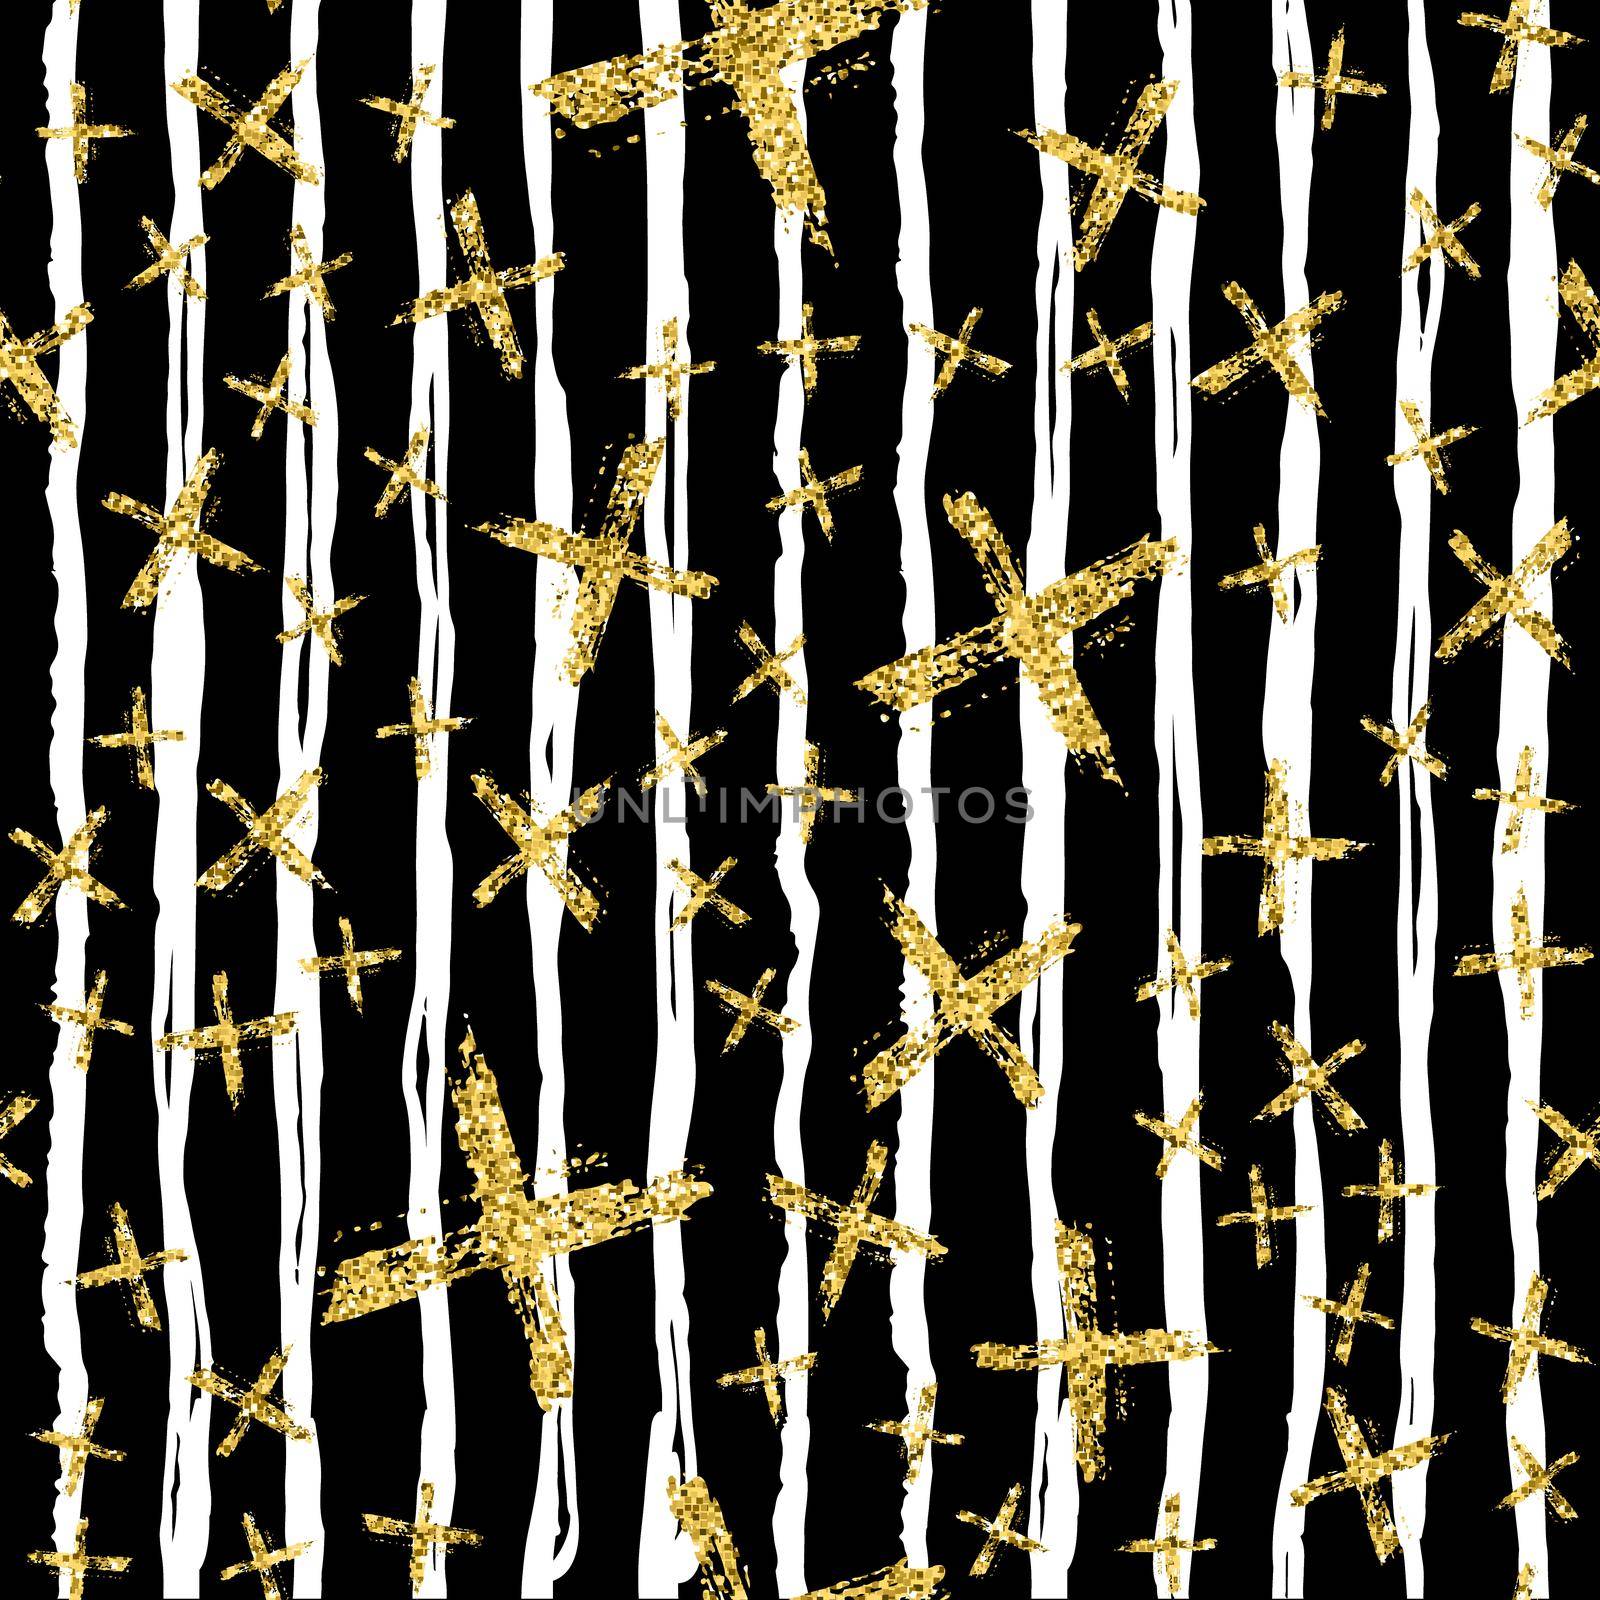 Modern seamless pattern with brush stripes and cross. White, gold metallic color on black background. Golden glitter texture. Ink geometric elements. Fashion catwalk style. Repeat fabric cloth print. by DesignAB